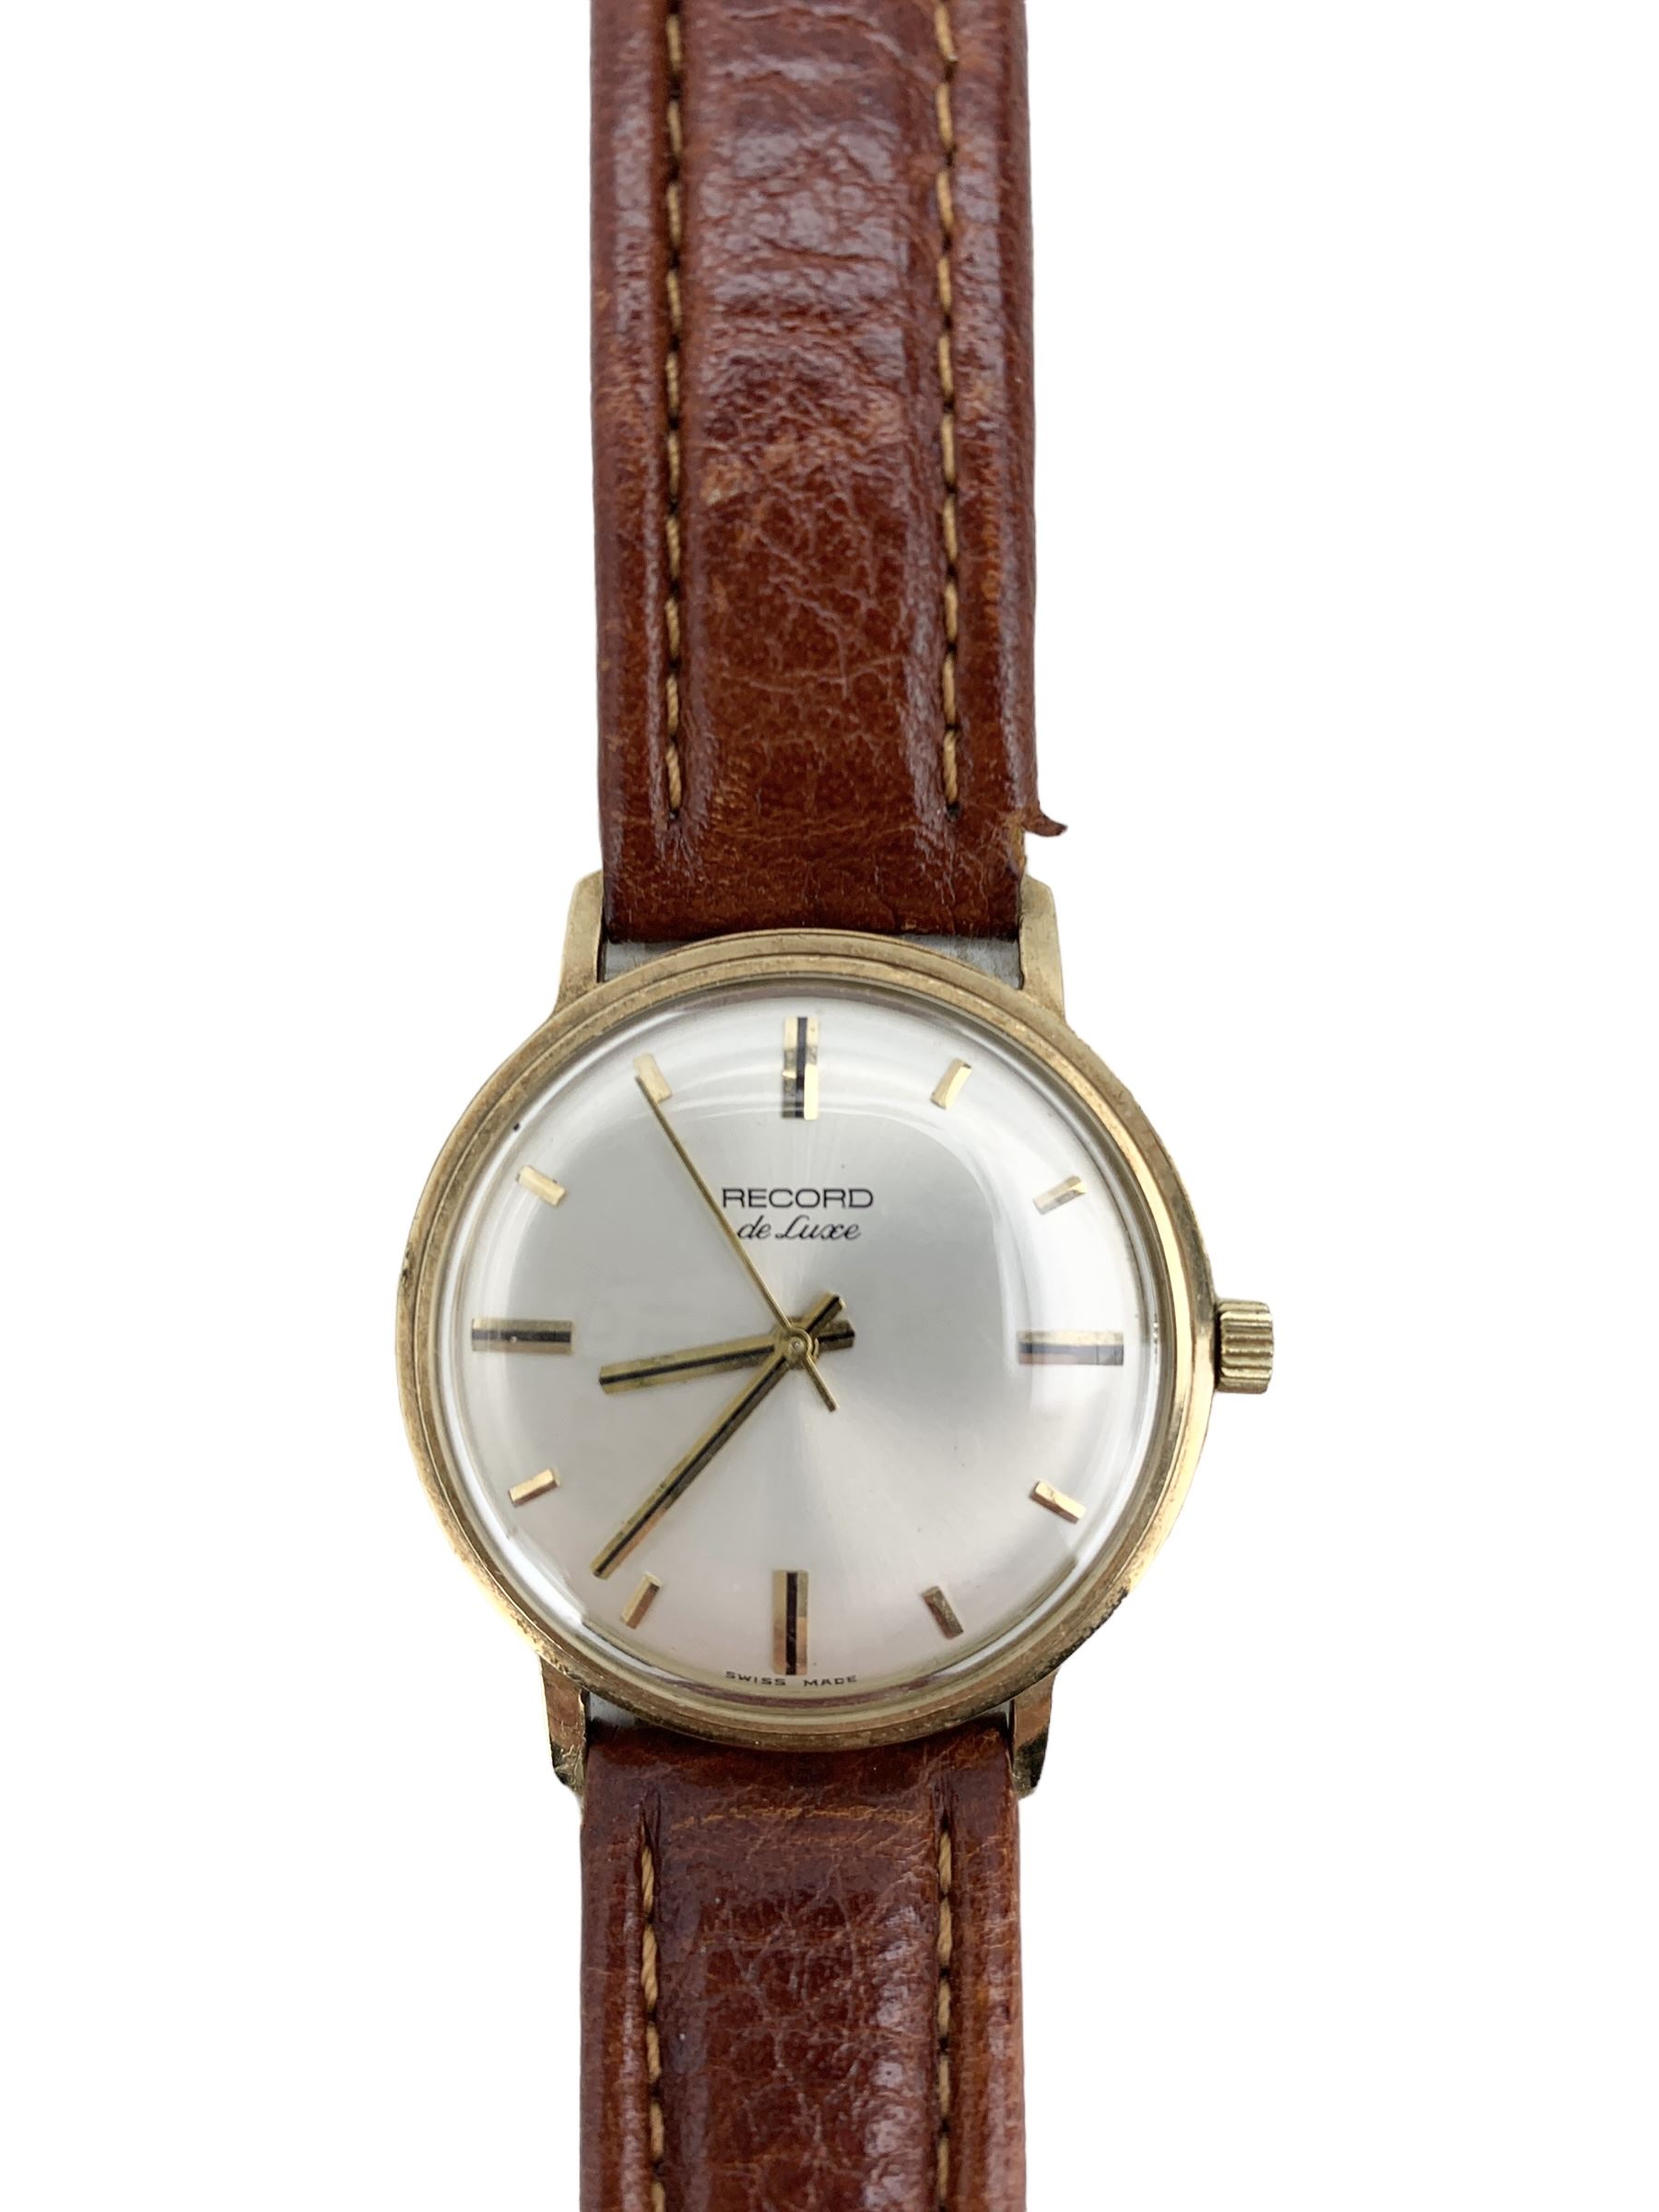 Record de Luxe gentleman's 9ct gold automatic presentation wristwatch - Image 2 of 2